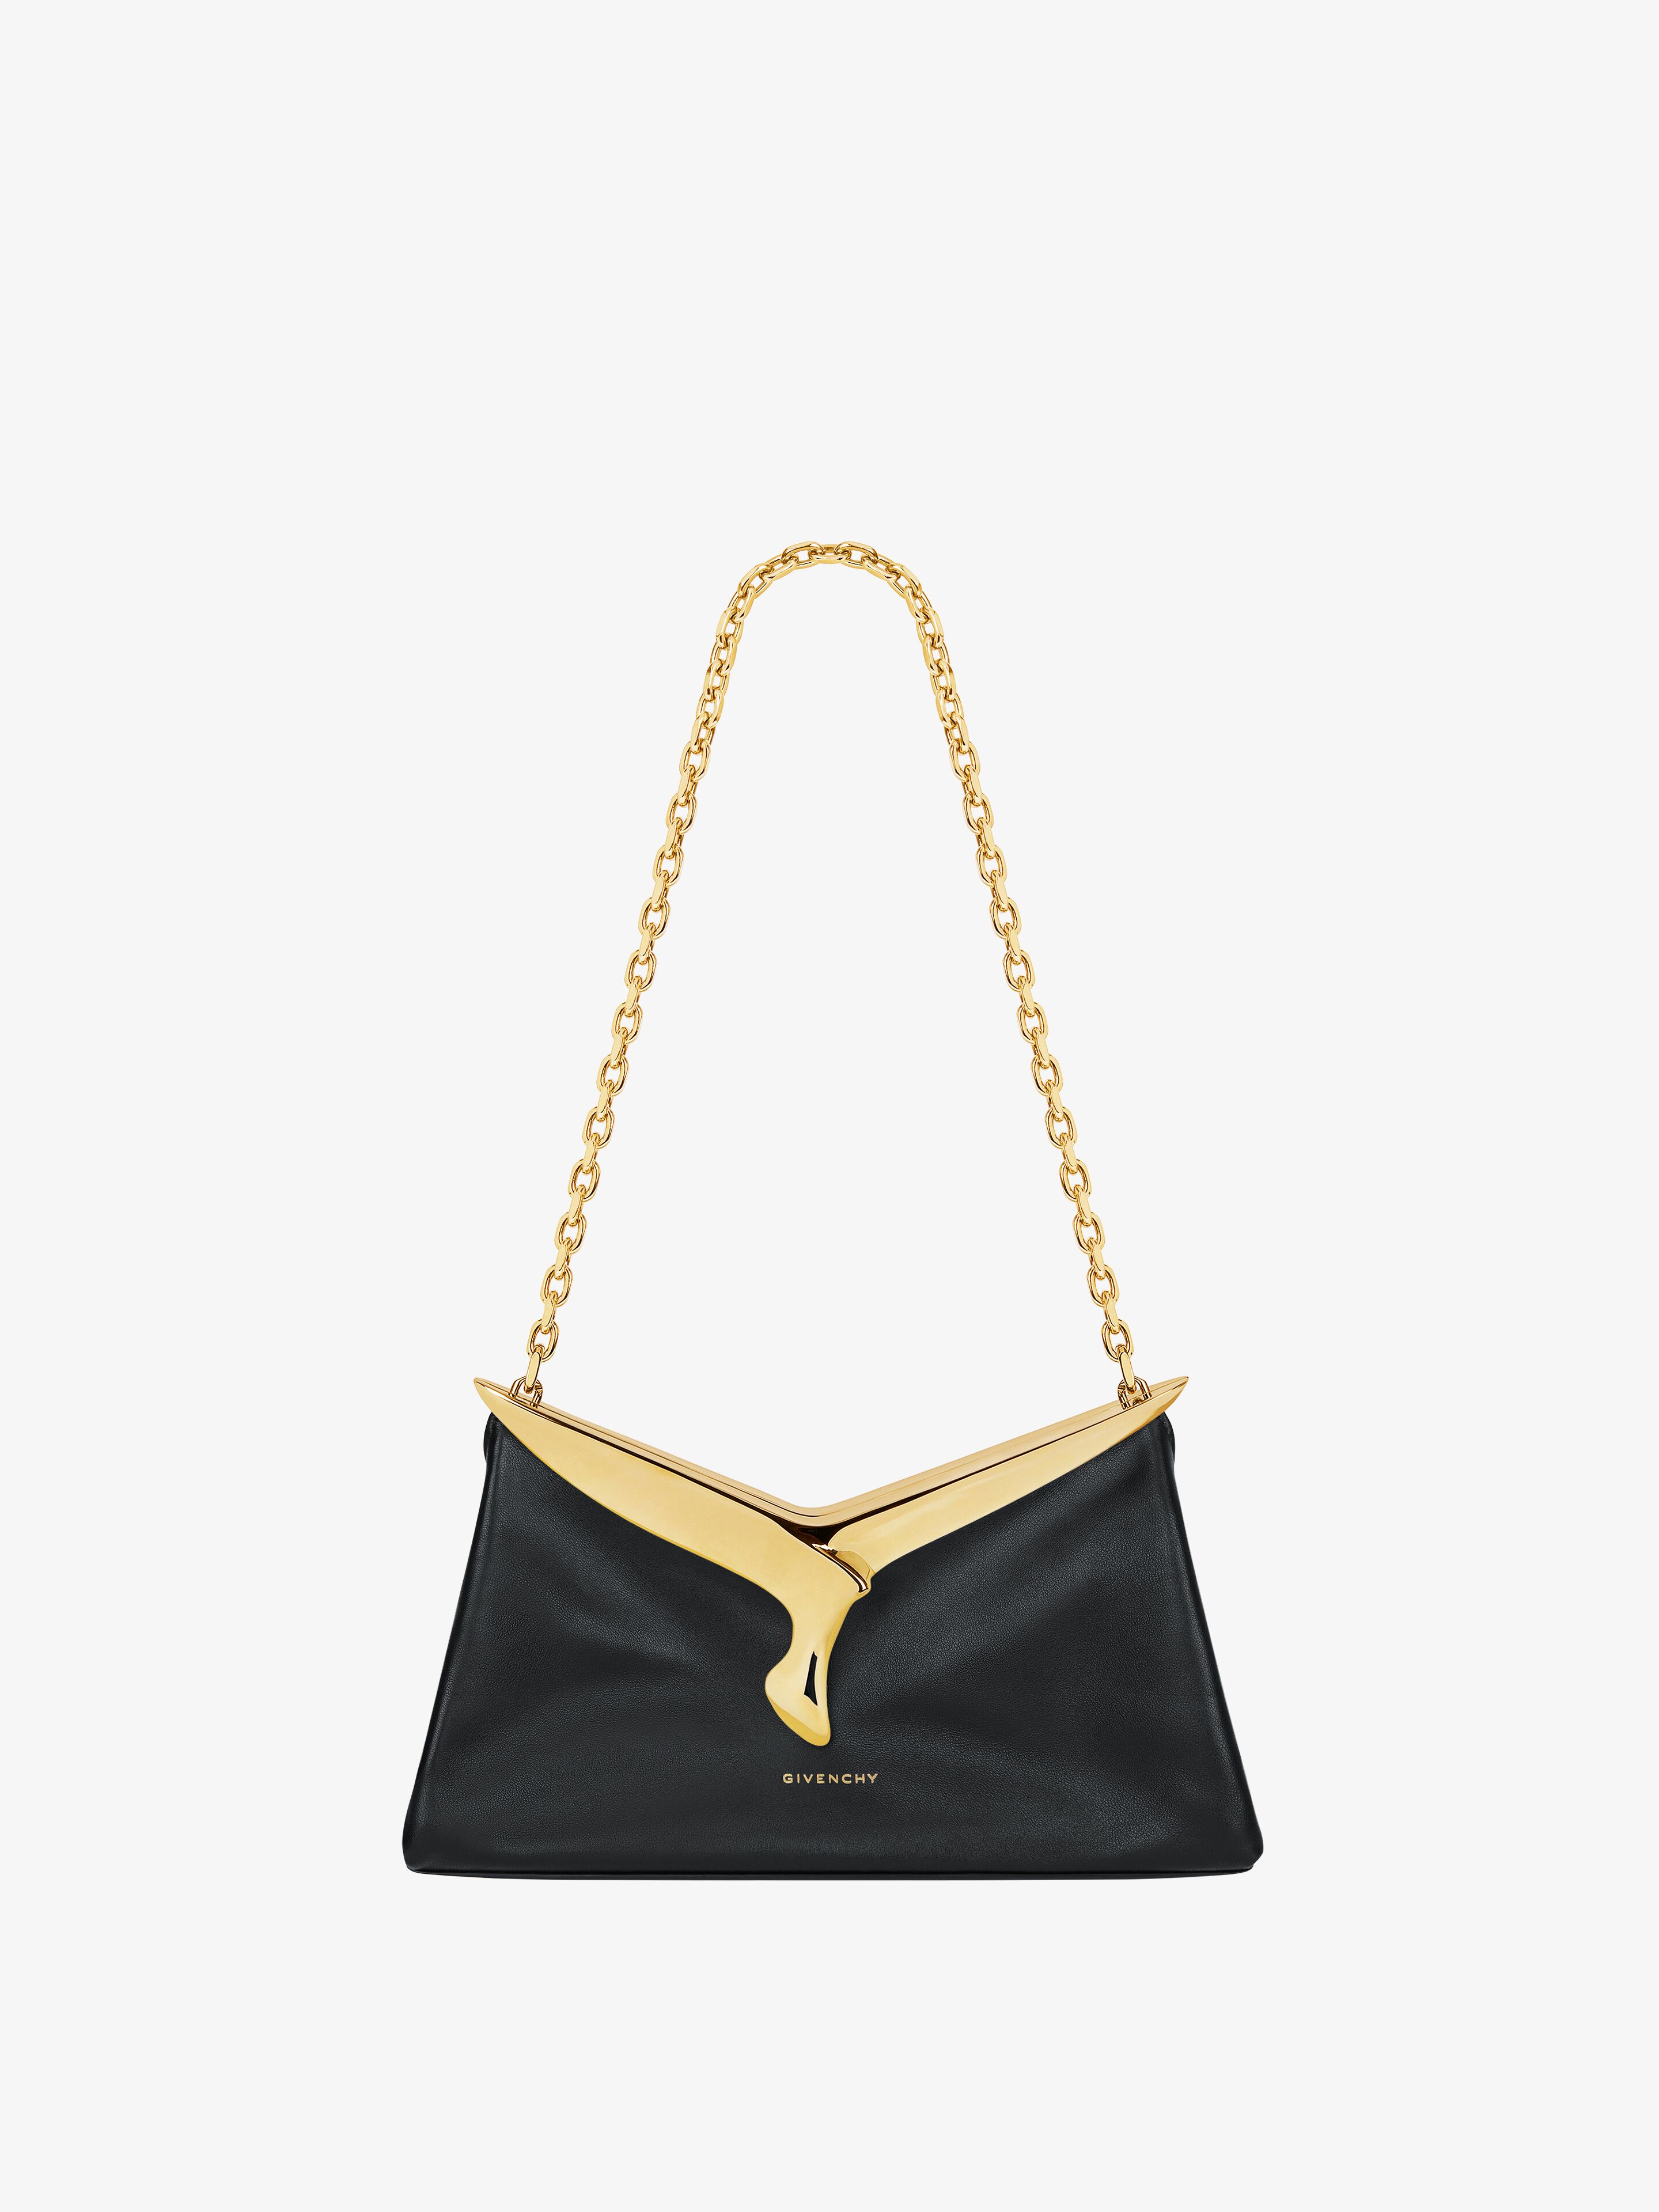 Givenchy Cut Out Bird Bag In Nappa Leather In Multicolor